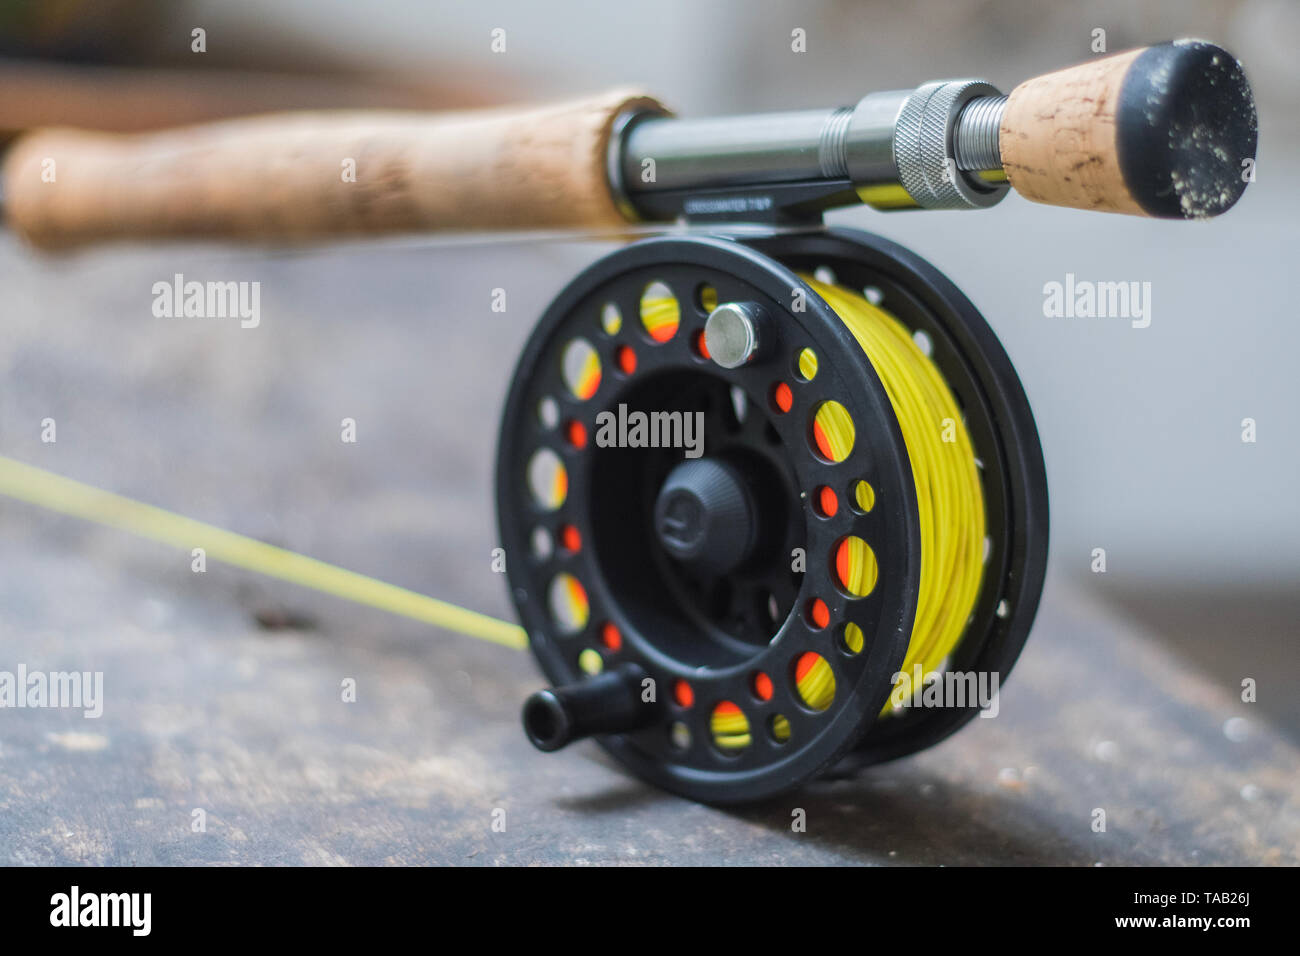 Saltwater fly fishing fly rod and reel Stock Photo